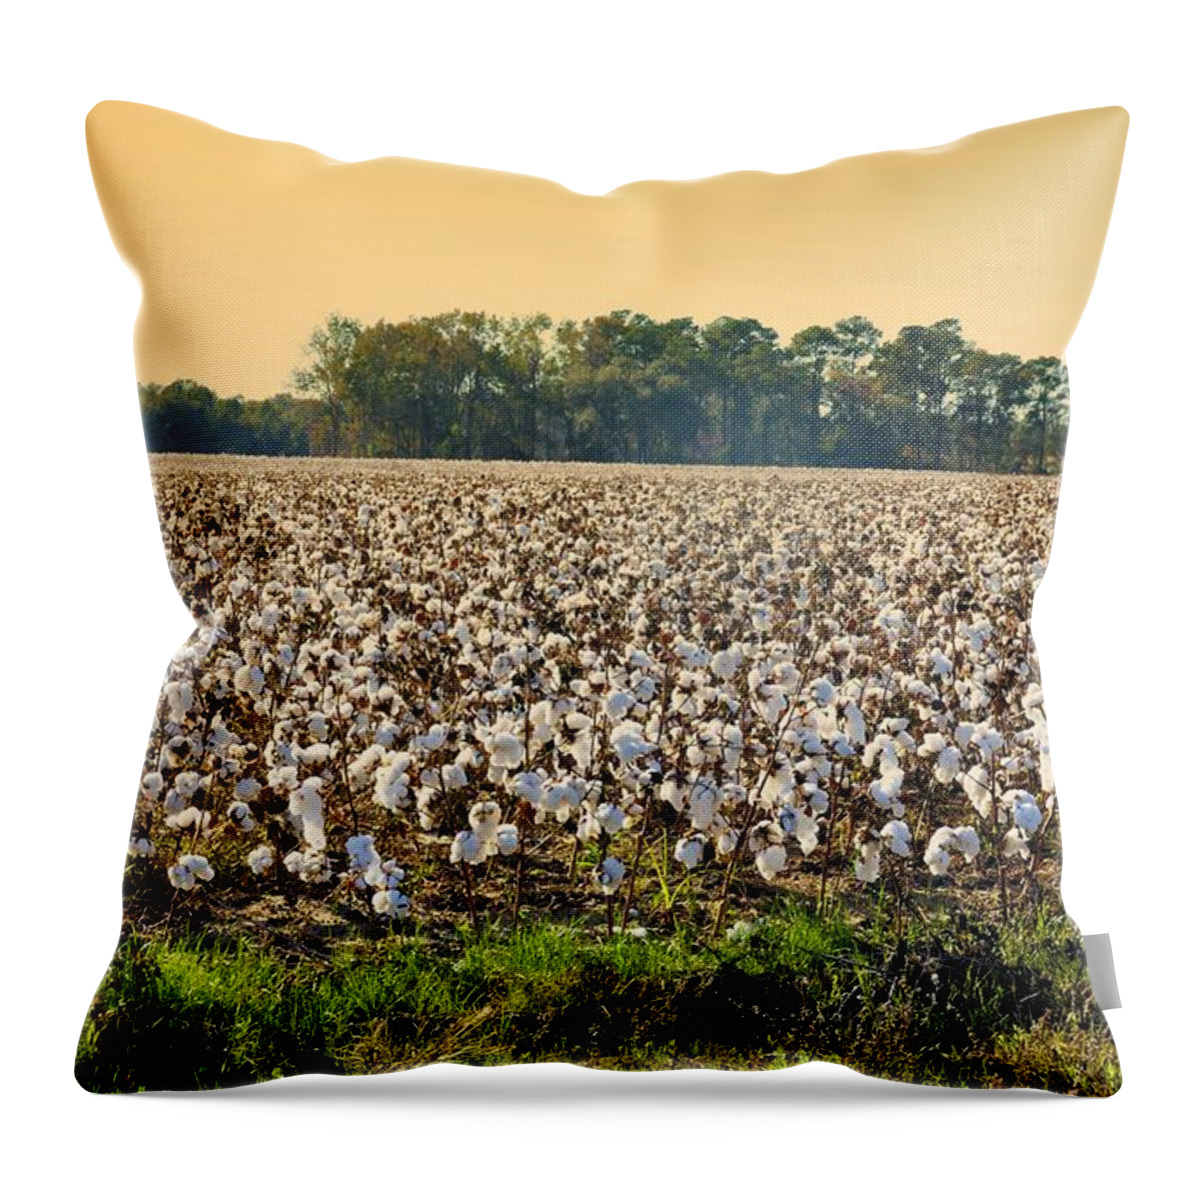 Landscapes Throw Pillow featuring the photograph Cotton Fields Back Home by Jan Amiss Photography